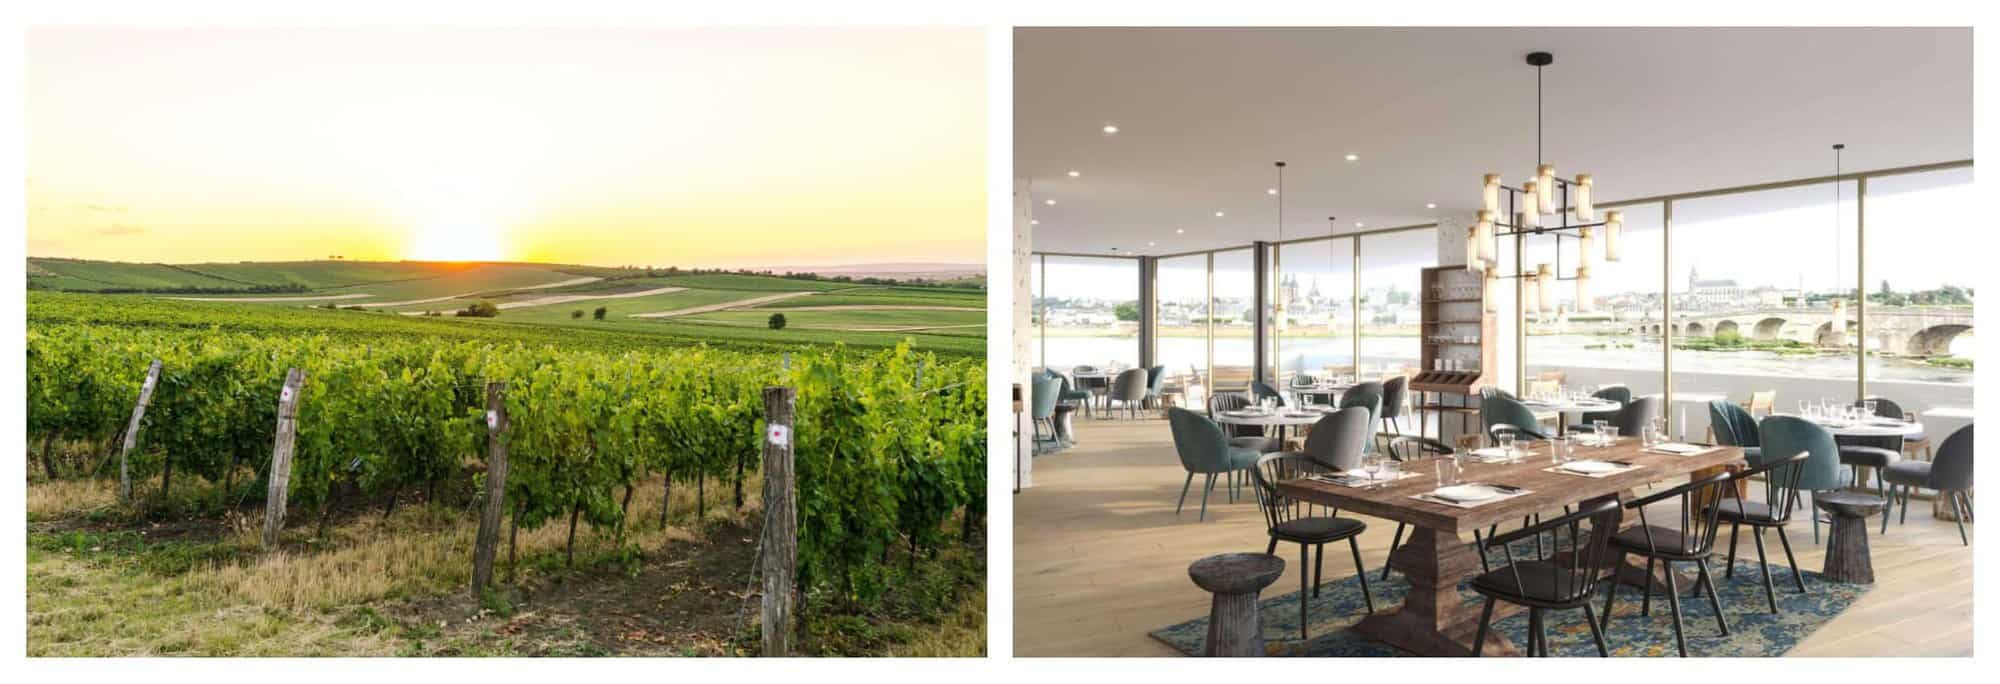 Left: Vineyard is lit up by the sunset. Right: Dining tables and chairs inside Fleur de Loire Bistrot. 